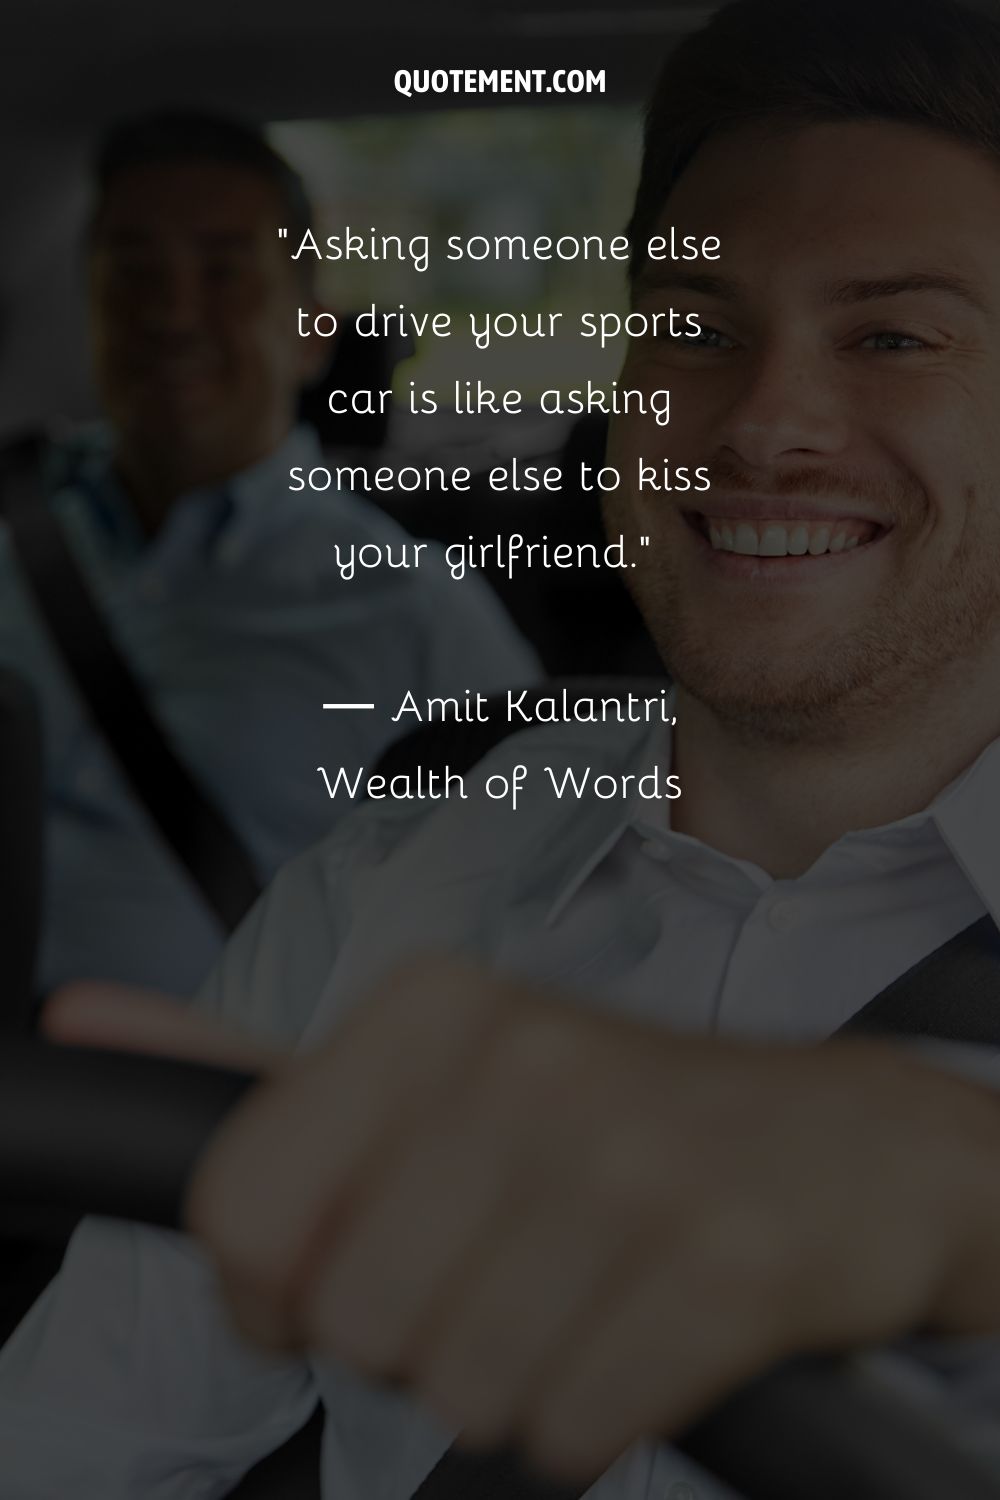 Asking someone else to drive your sports car is like asking someone else to kiss your girlfriend.